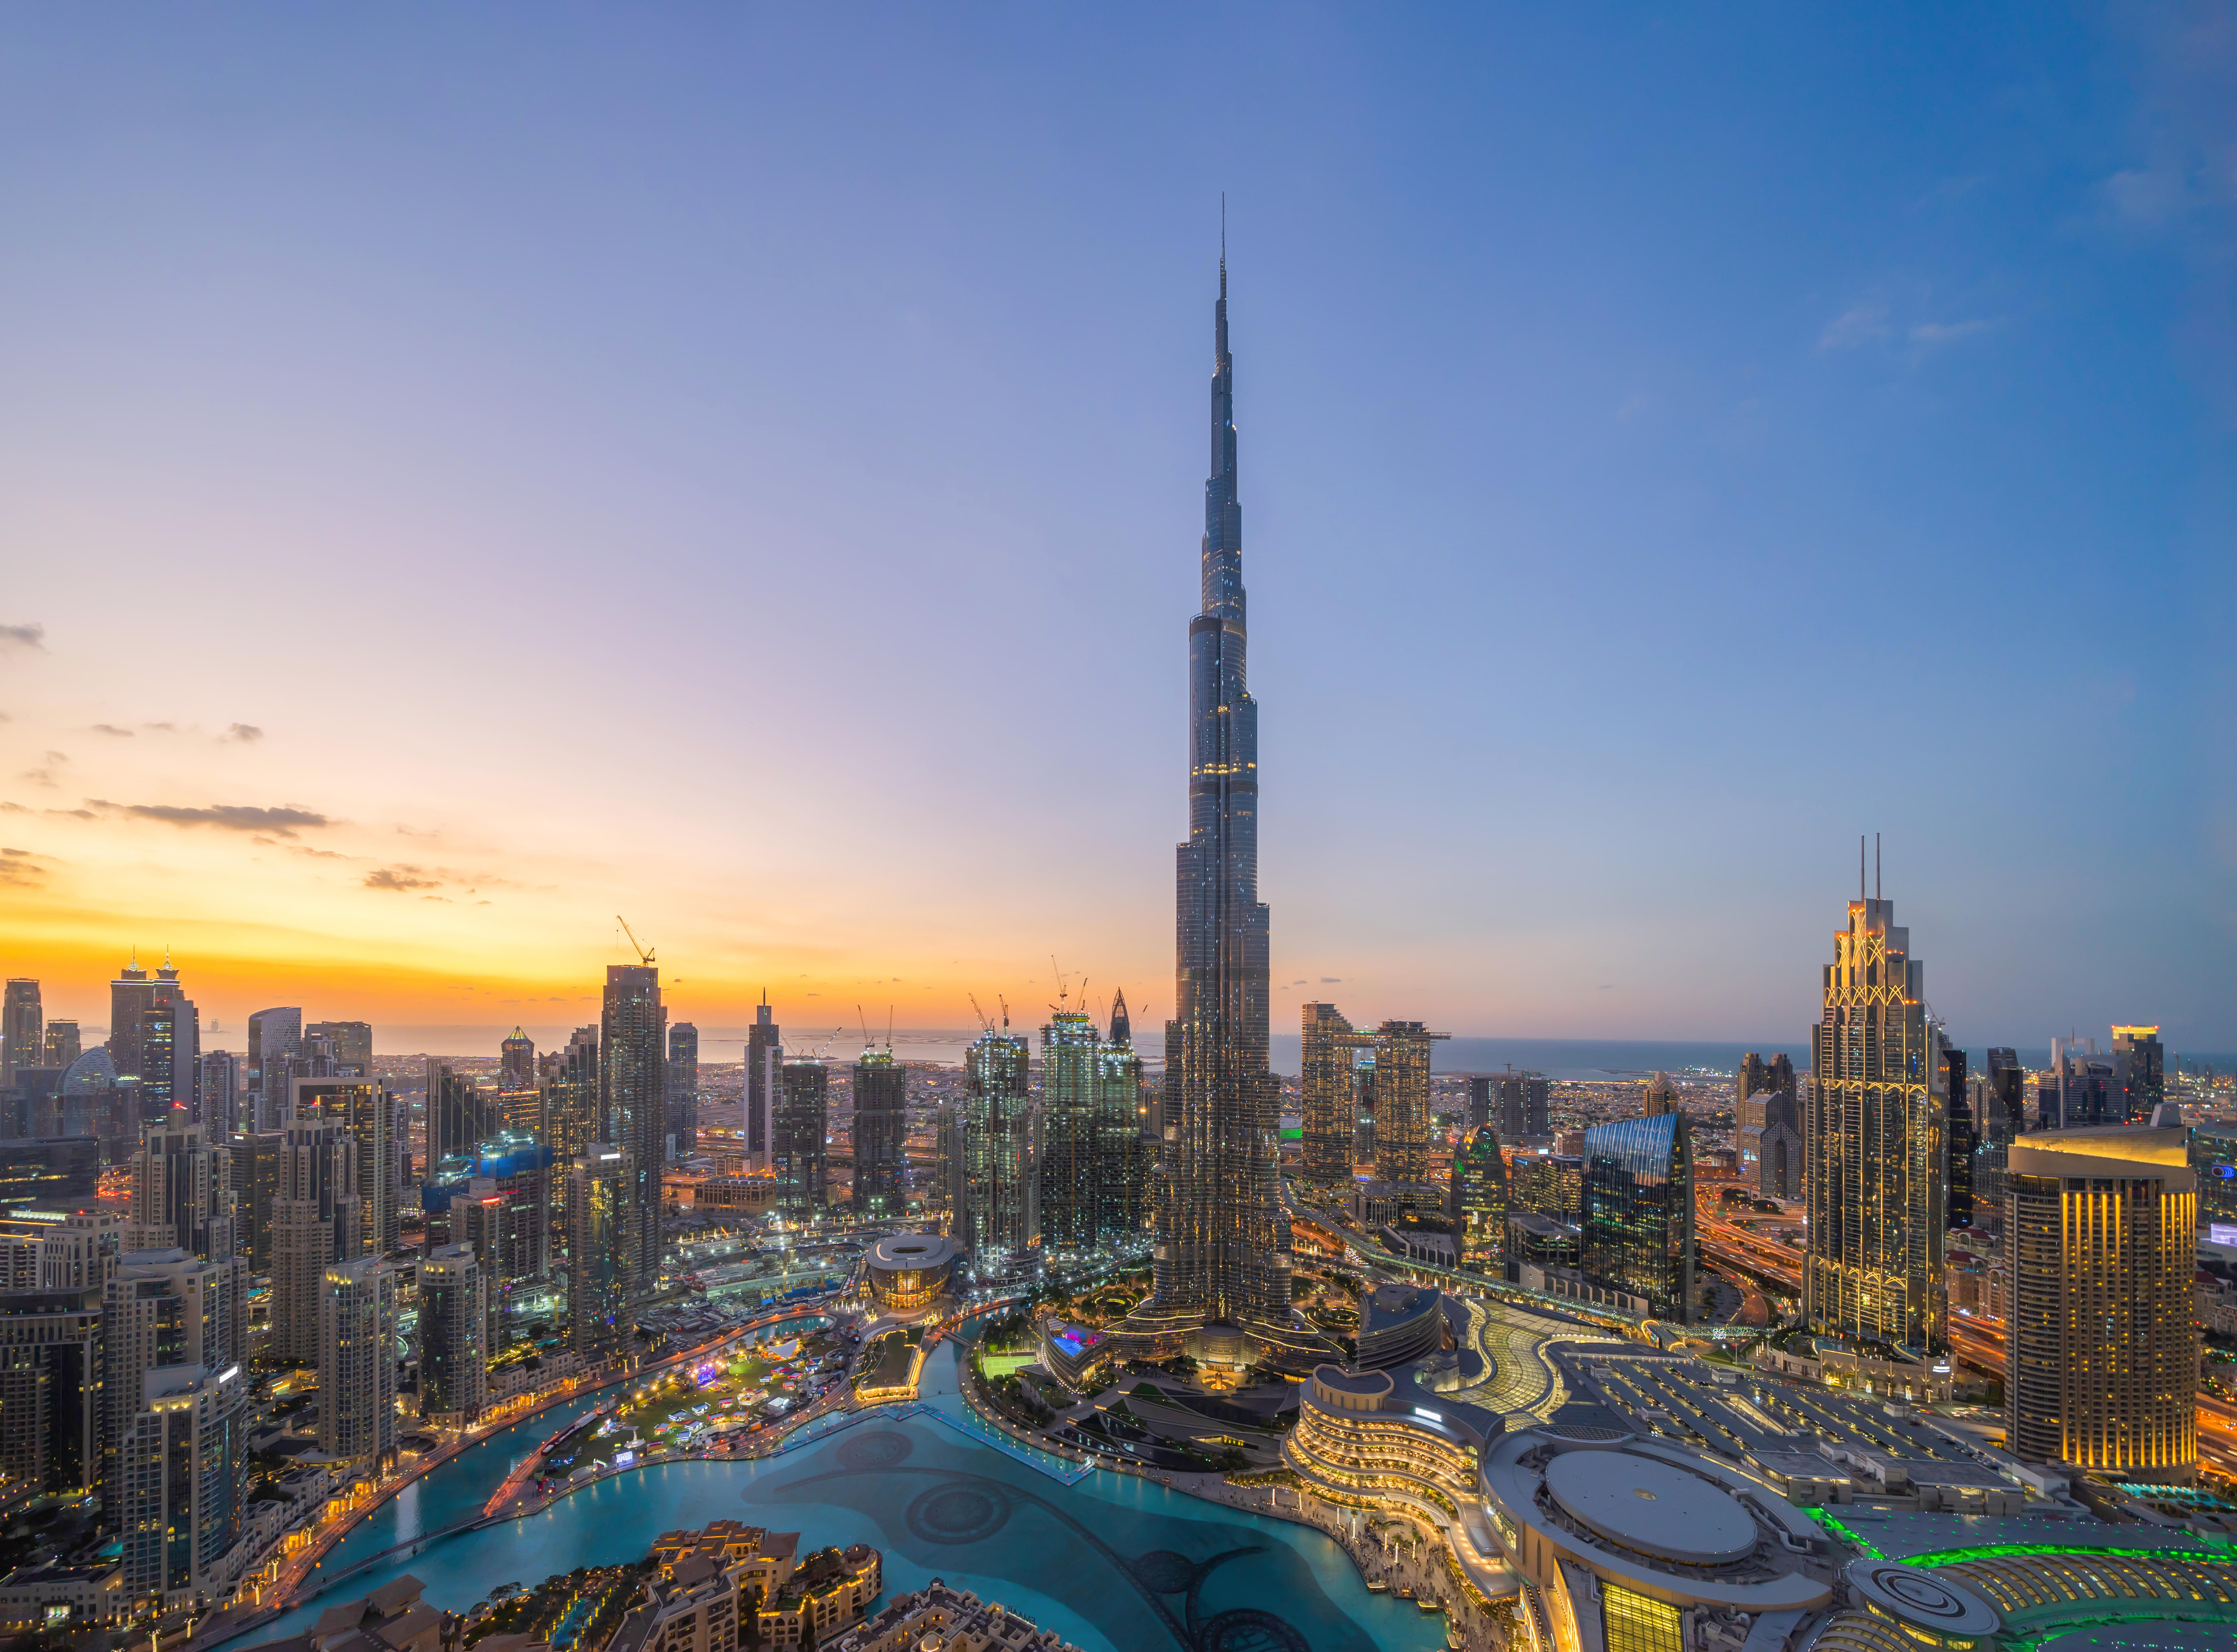 Enjoy Sunset View from the Top of Burj Khalifa